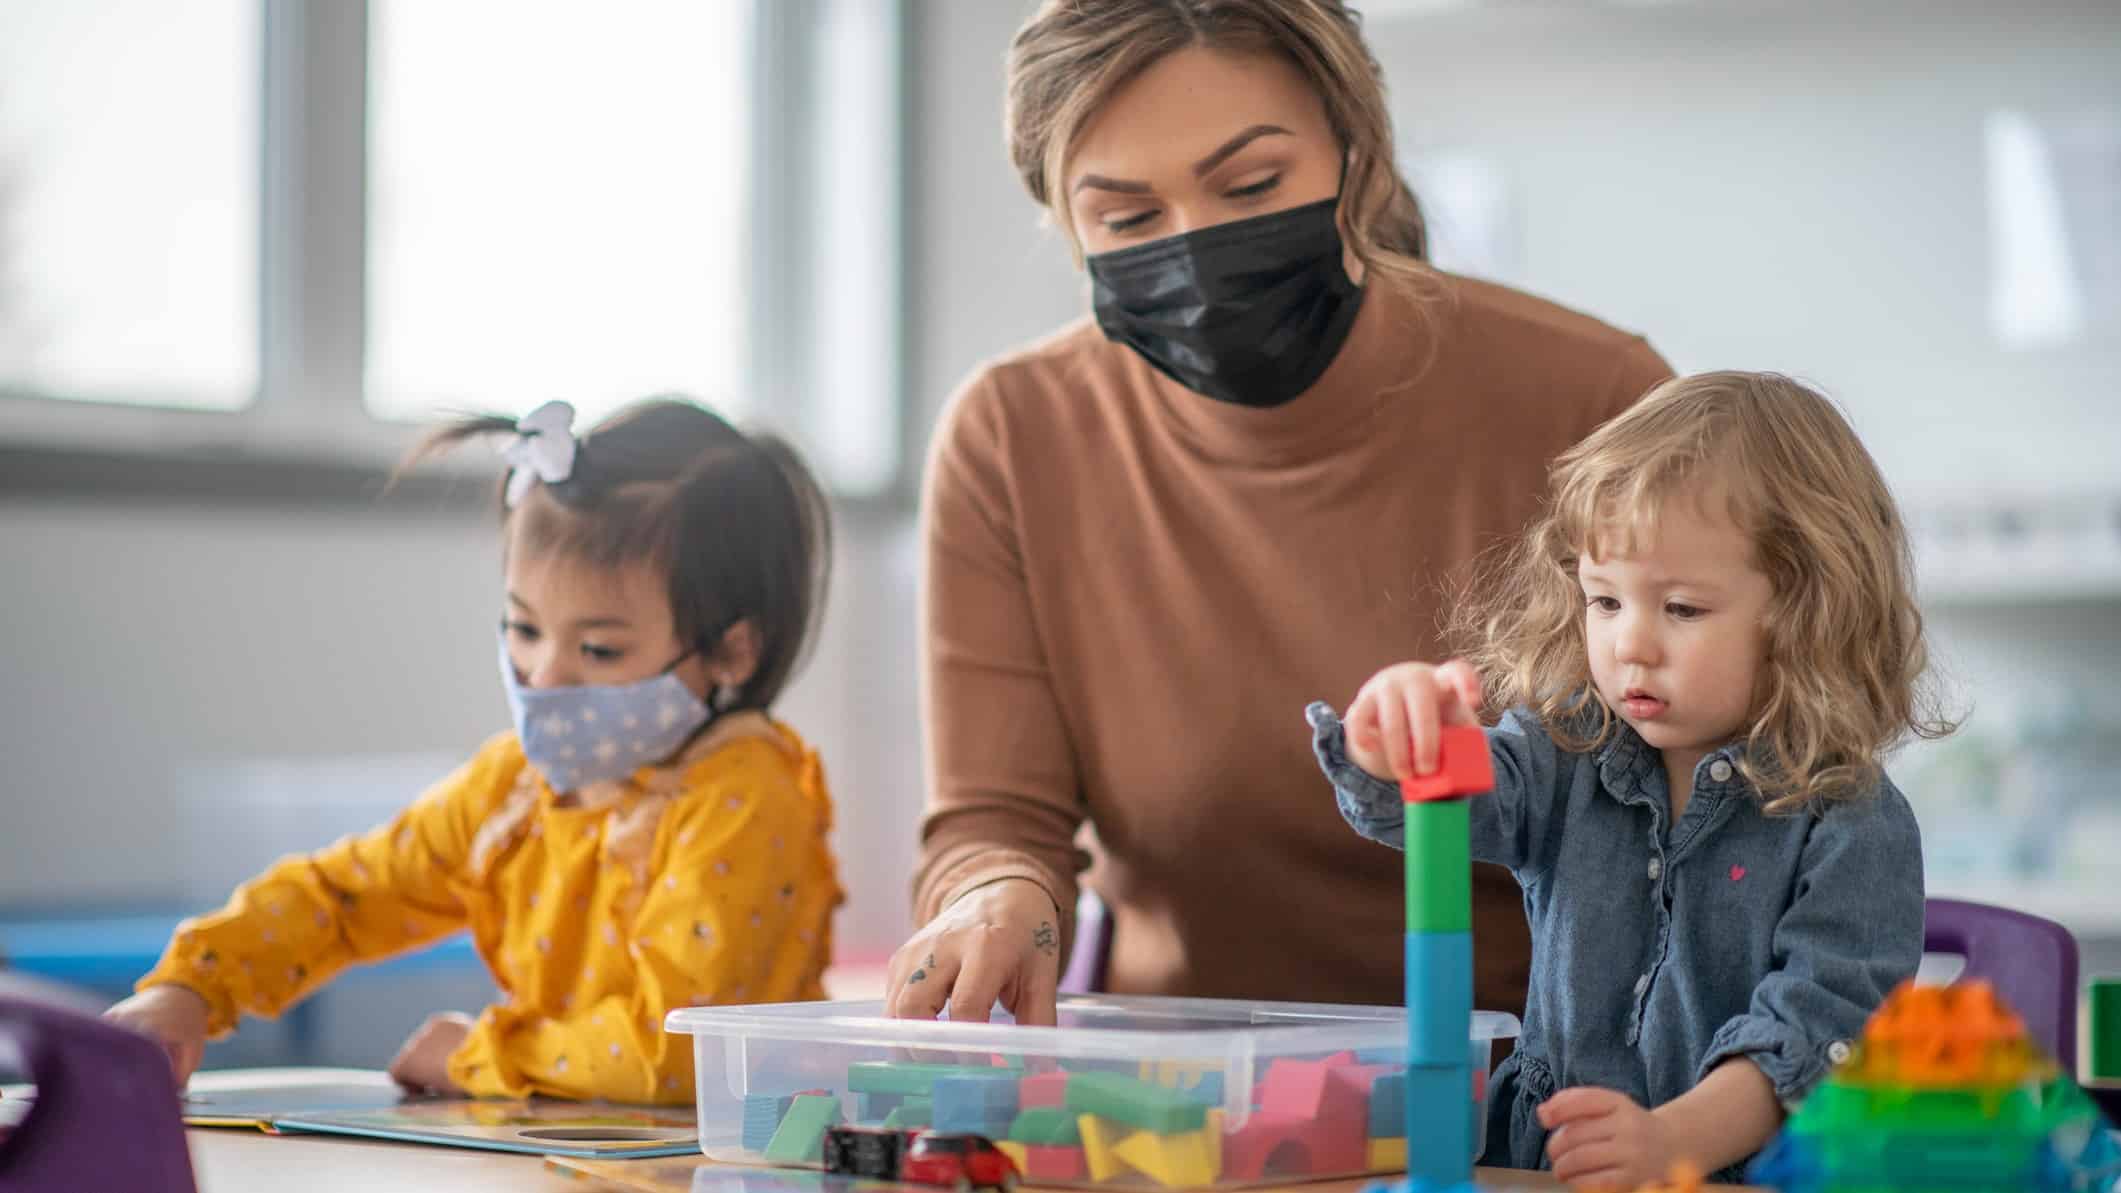 a childcare teacher wearing a face mask sits at a table with two small children playing with blocks. One of the children is also wearing a facemask.